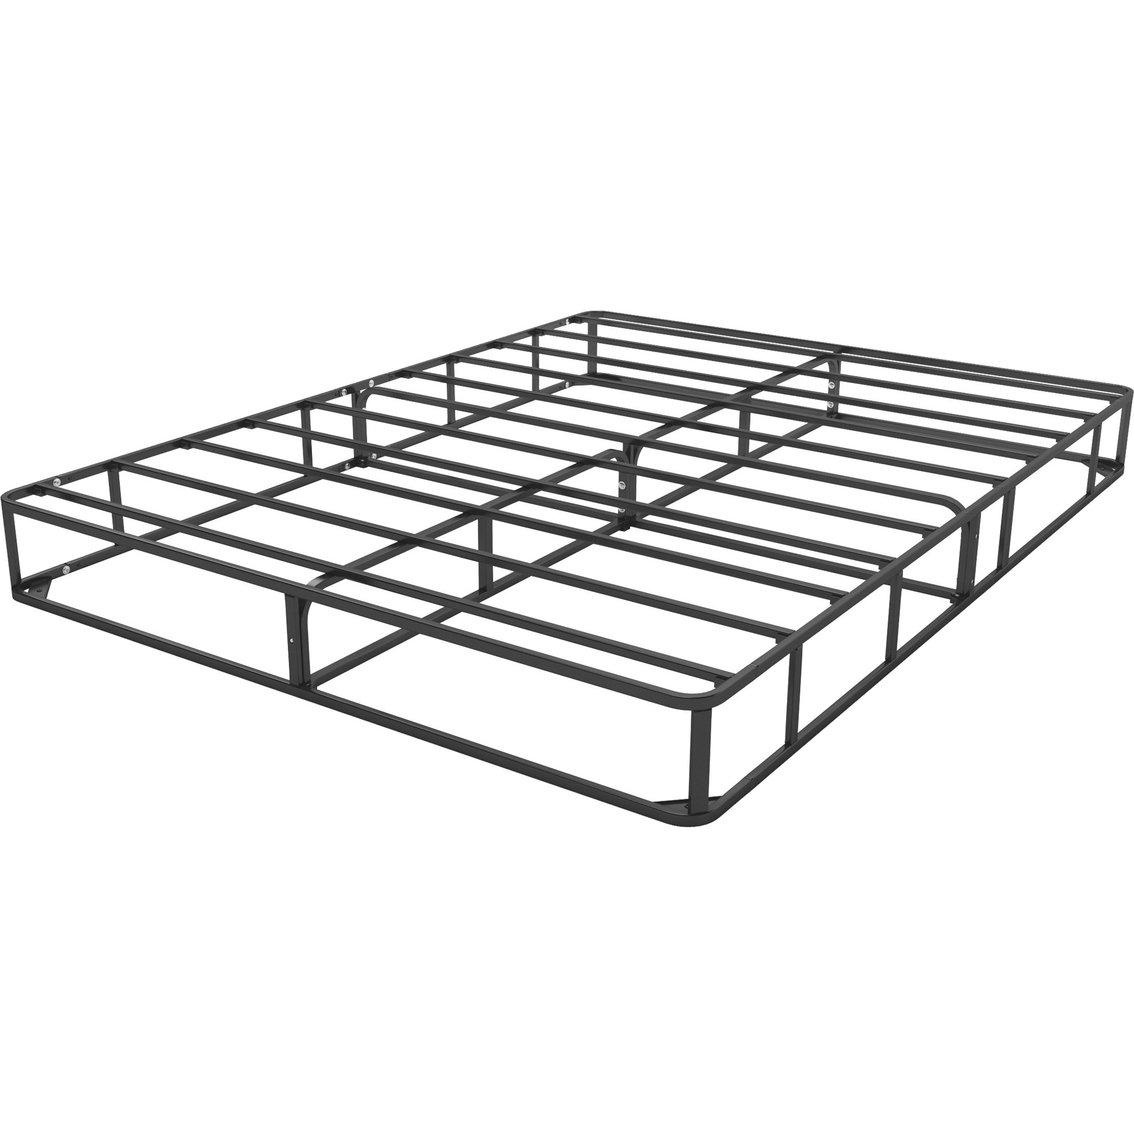 CorLiving SAL-102-F Ready-to-Assemble Full/Double Box Spring - Image 4 of 5